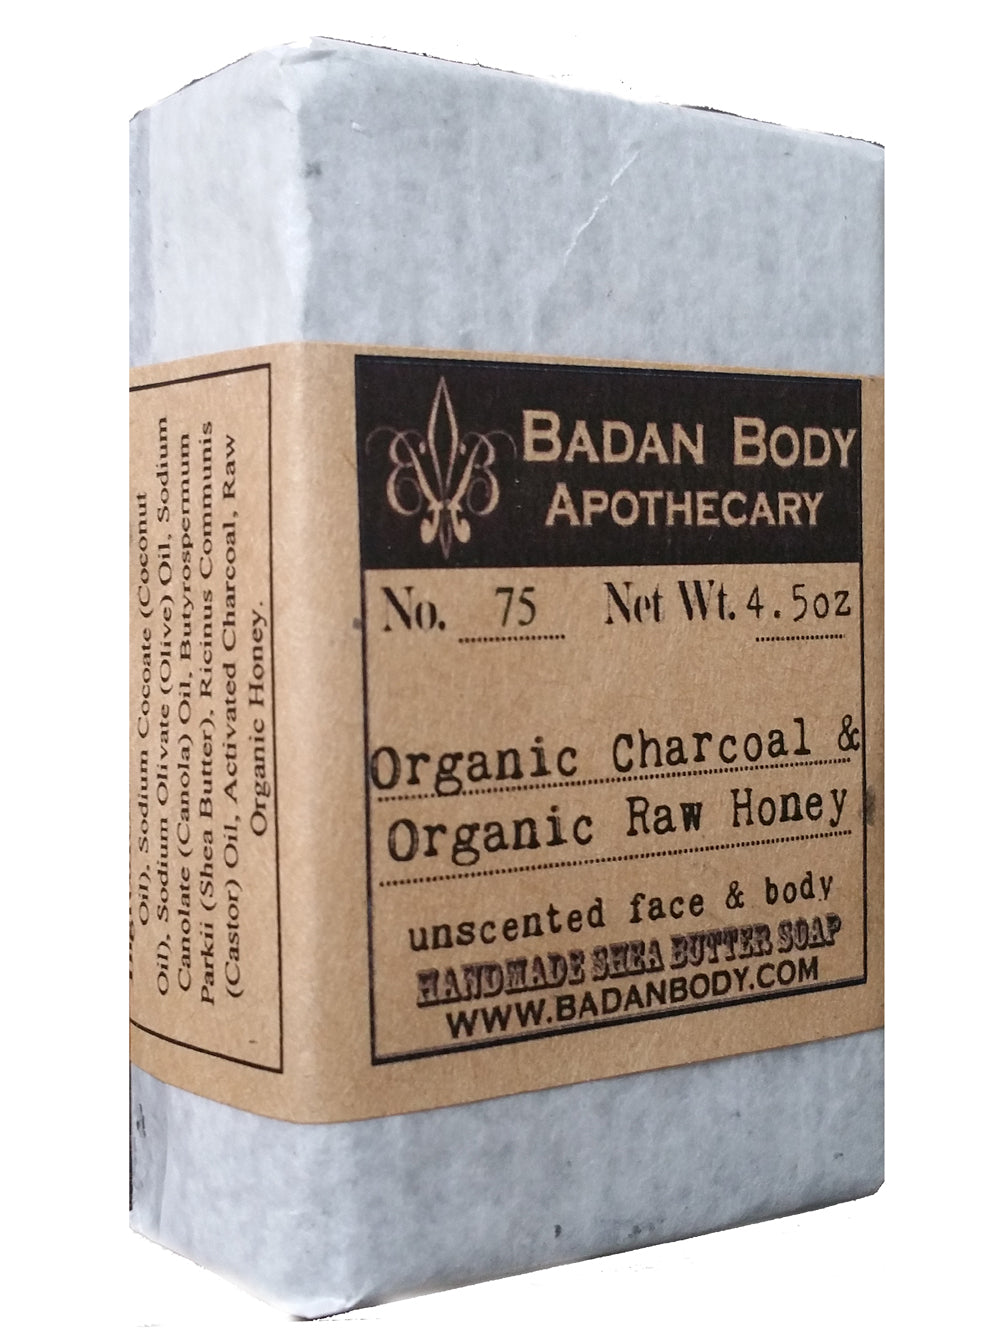 Organic Activated Charcoal & Raw Honey Soap